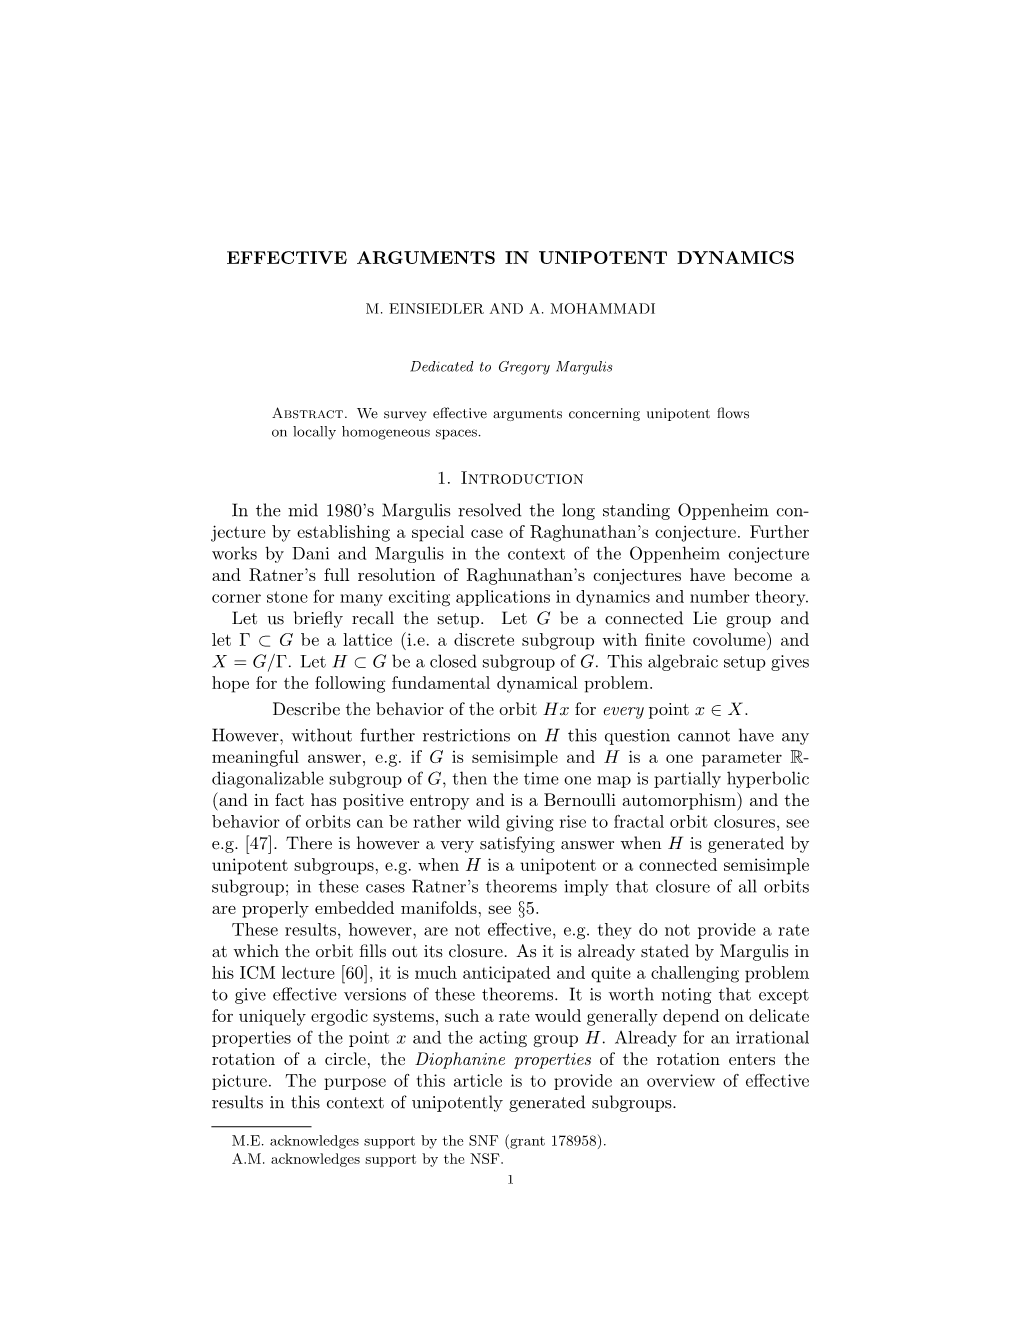 Effective Arguments in Unipotent Dynamics